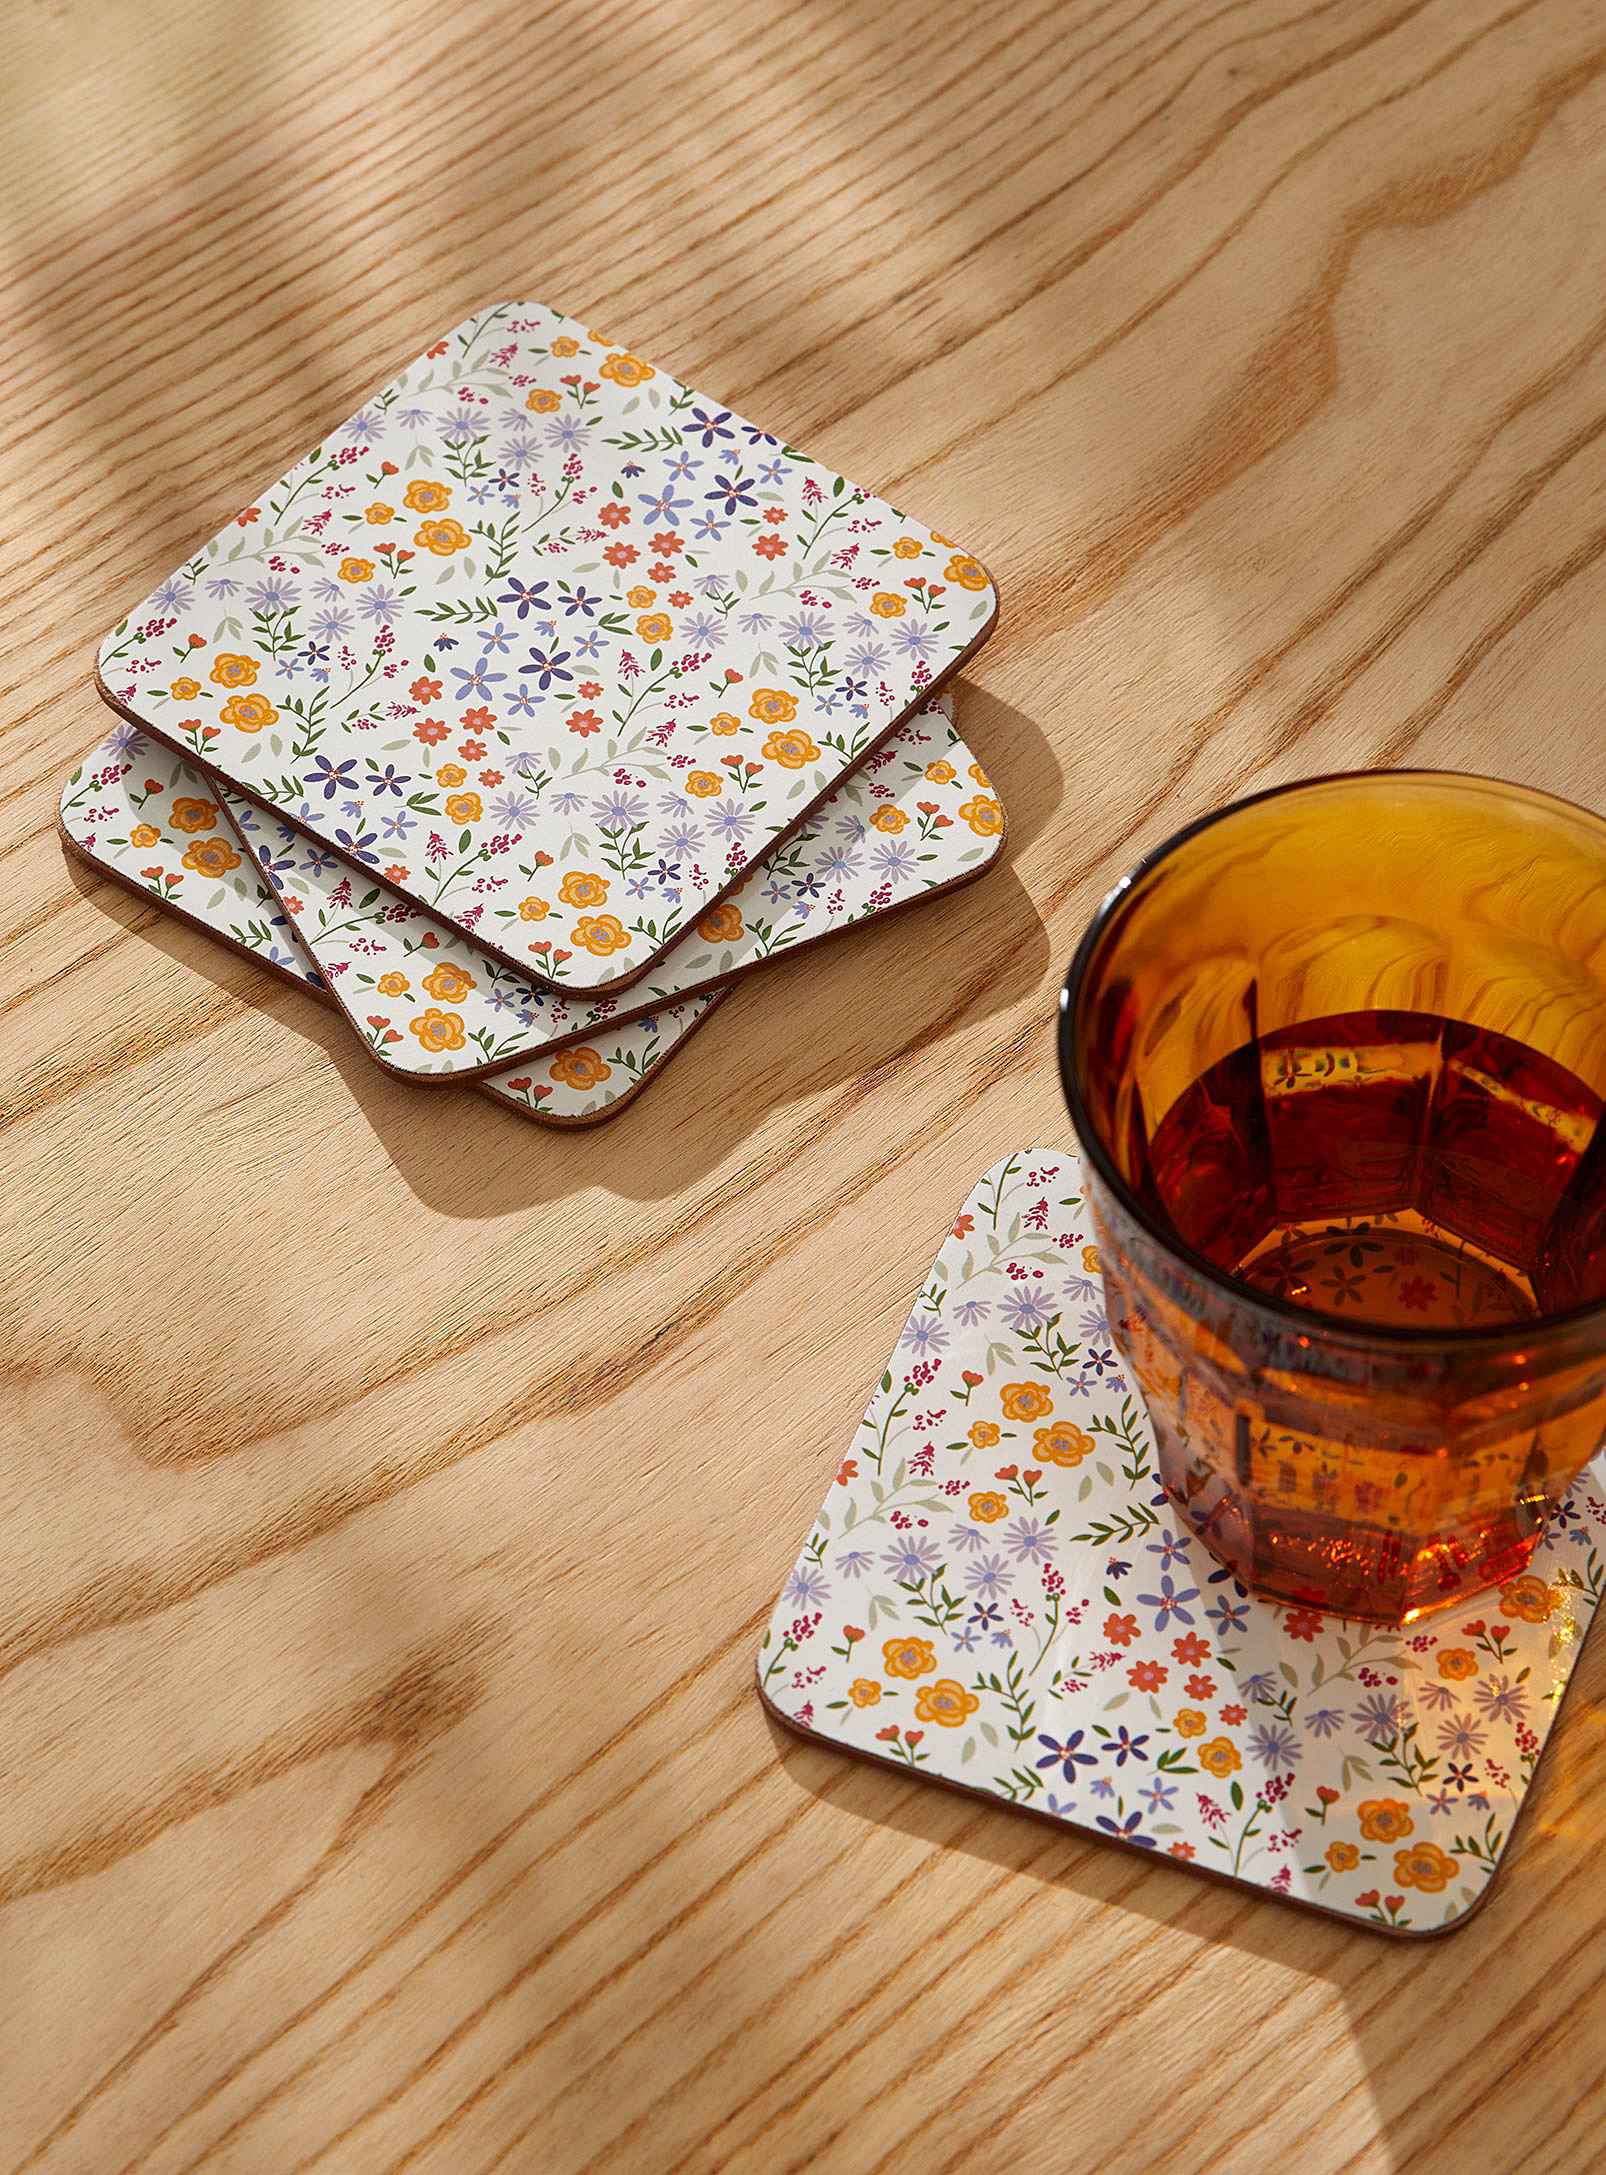 Simons Maison Countryside Flowers Laminated Cork Coasters Set Of 4 In Assorted